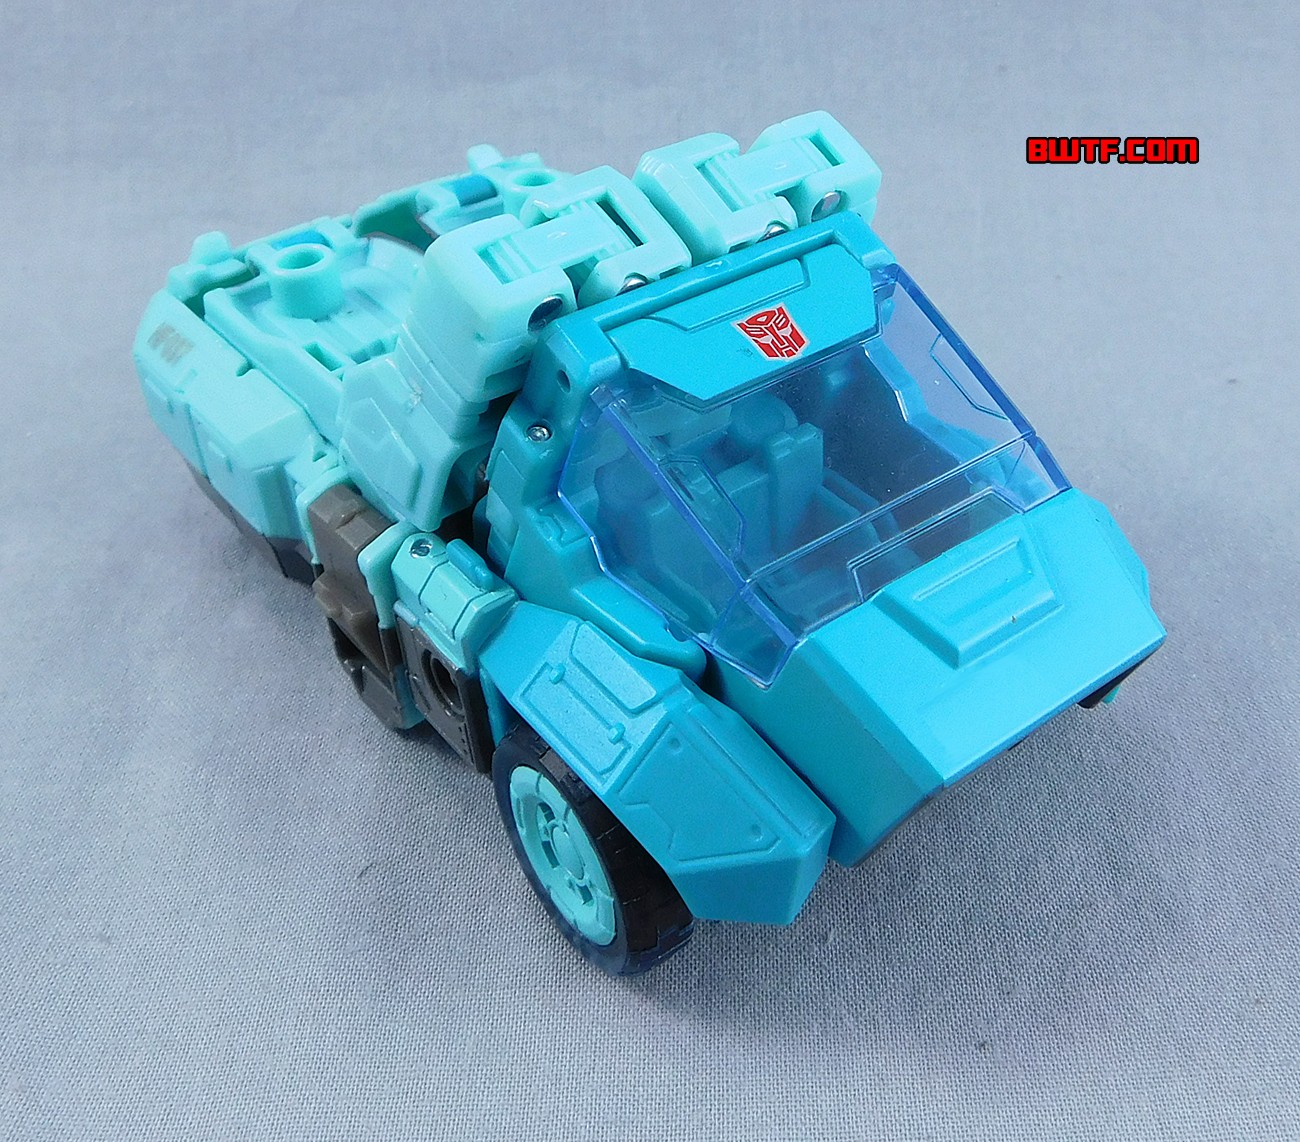 Transformers News: In-Hand Images of Transformers Titans Return Kup with Flintlock